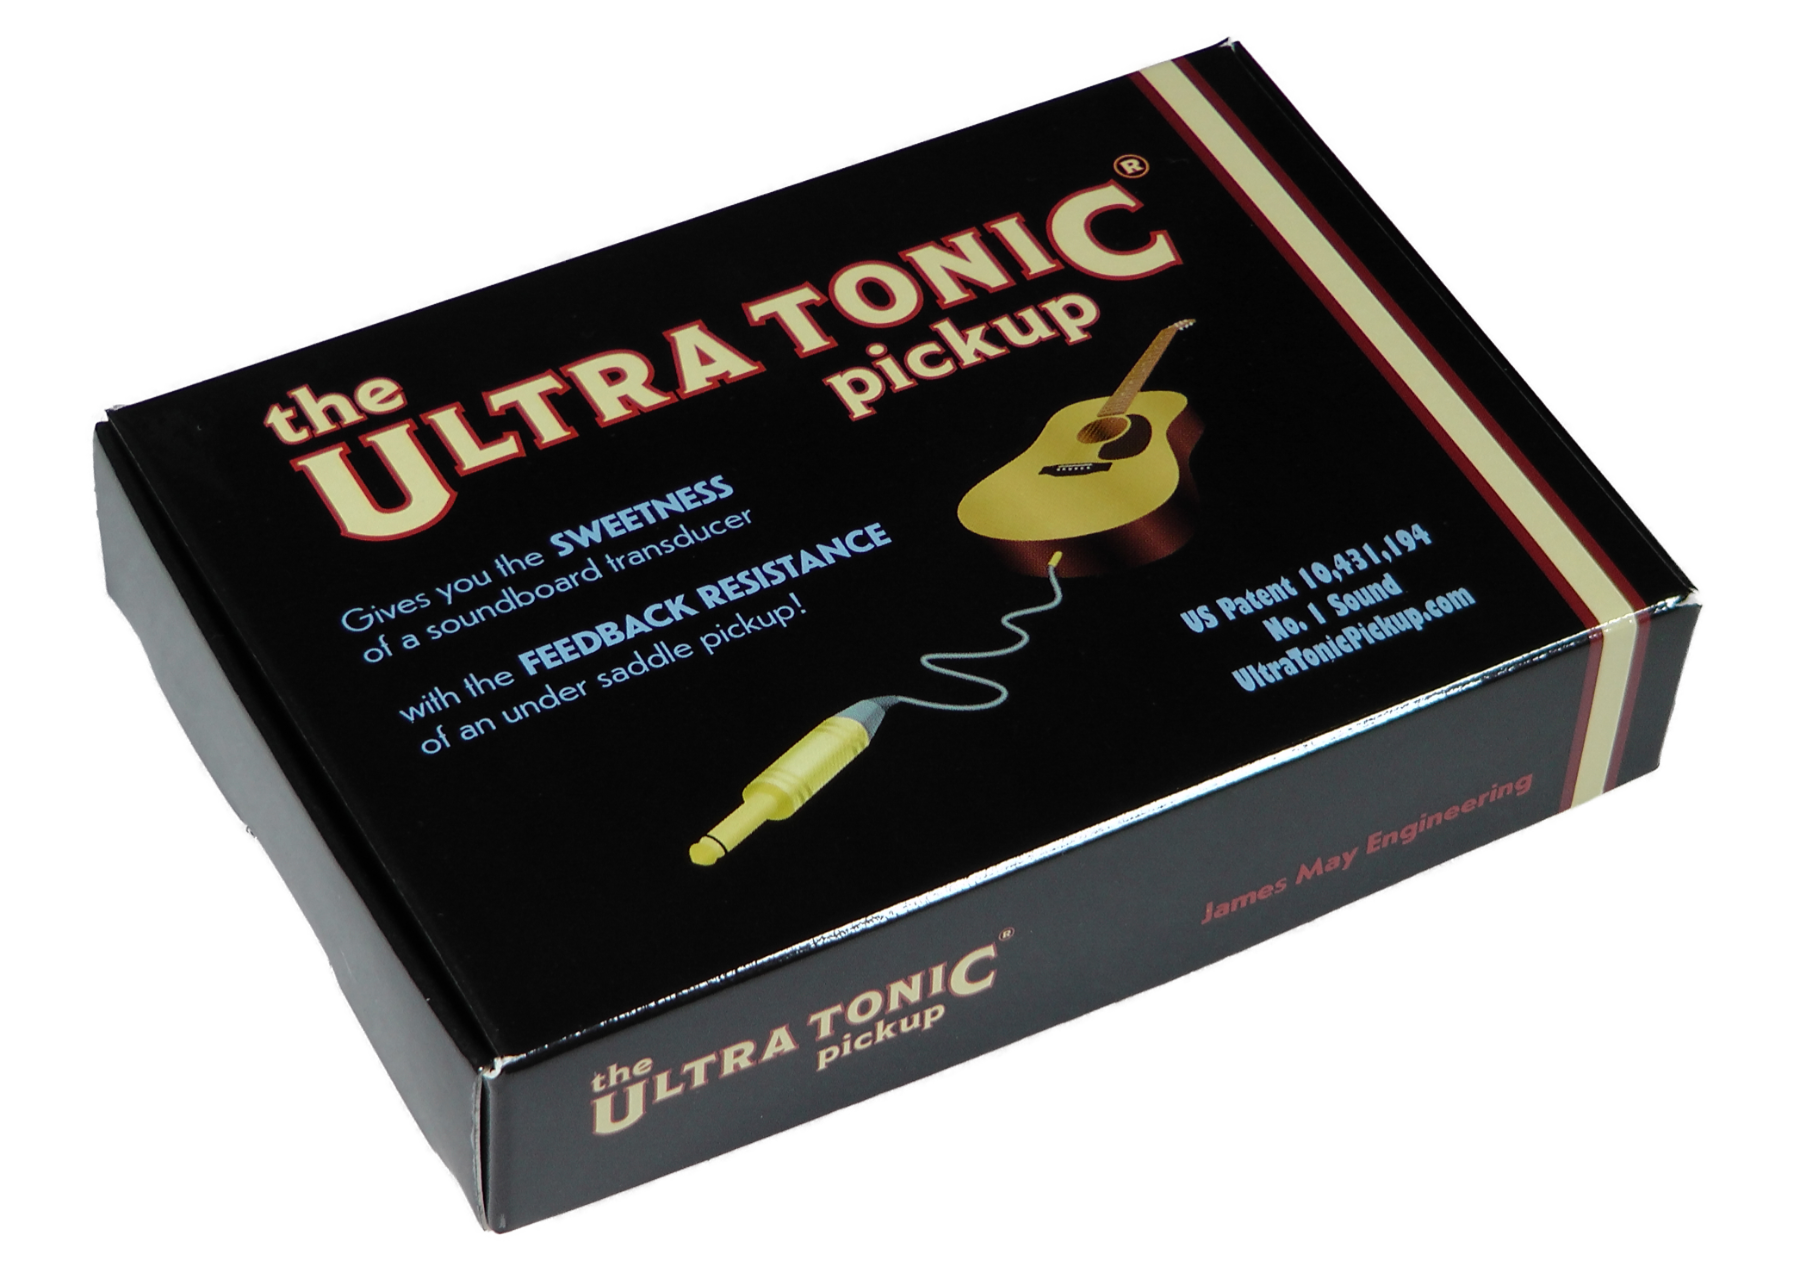 Ultra Tonic package